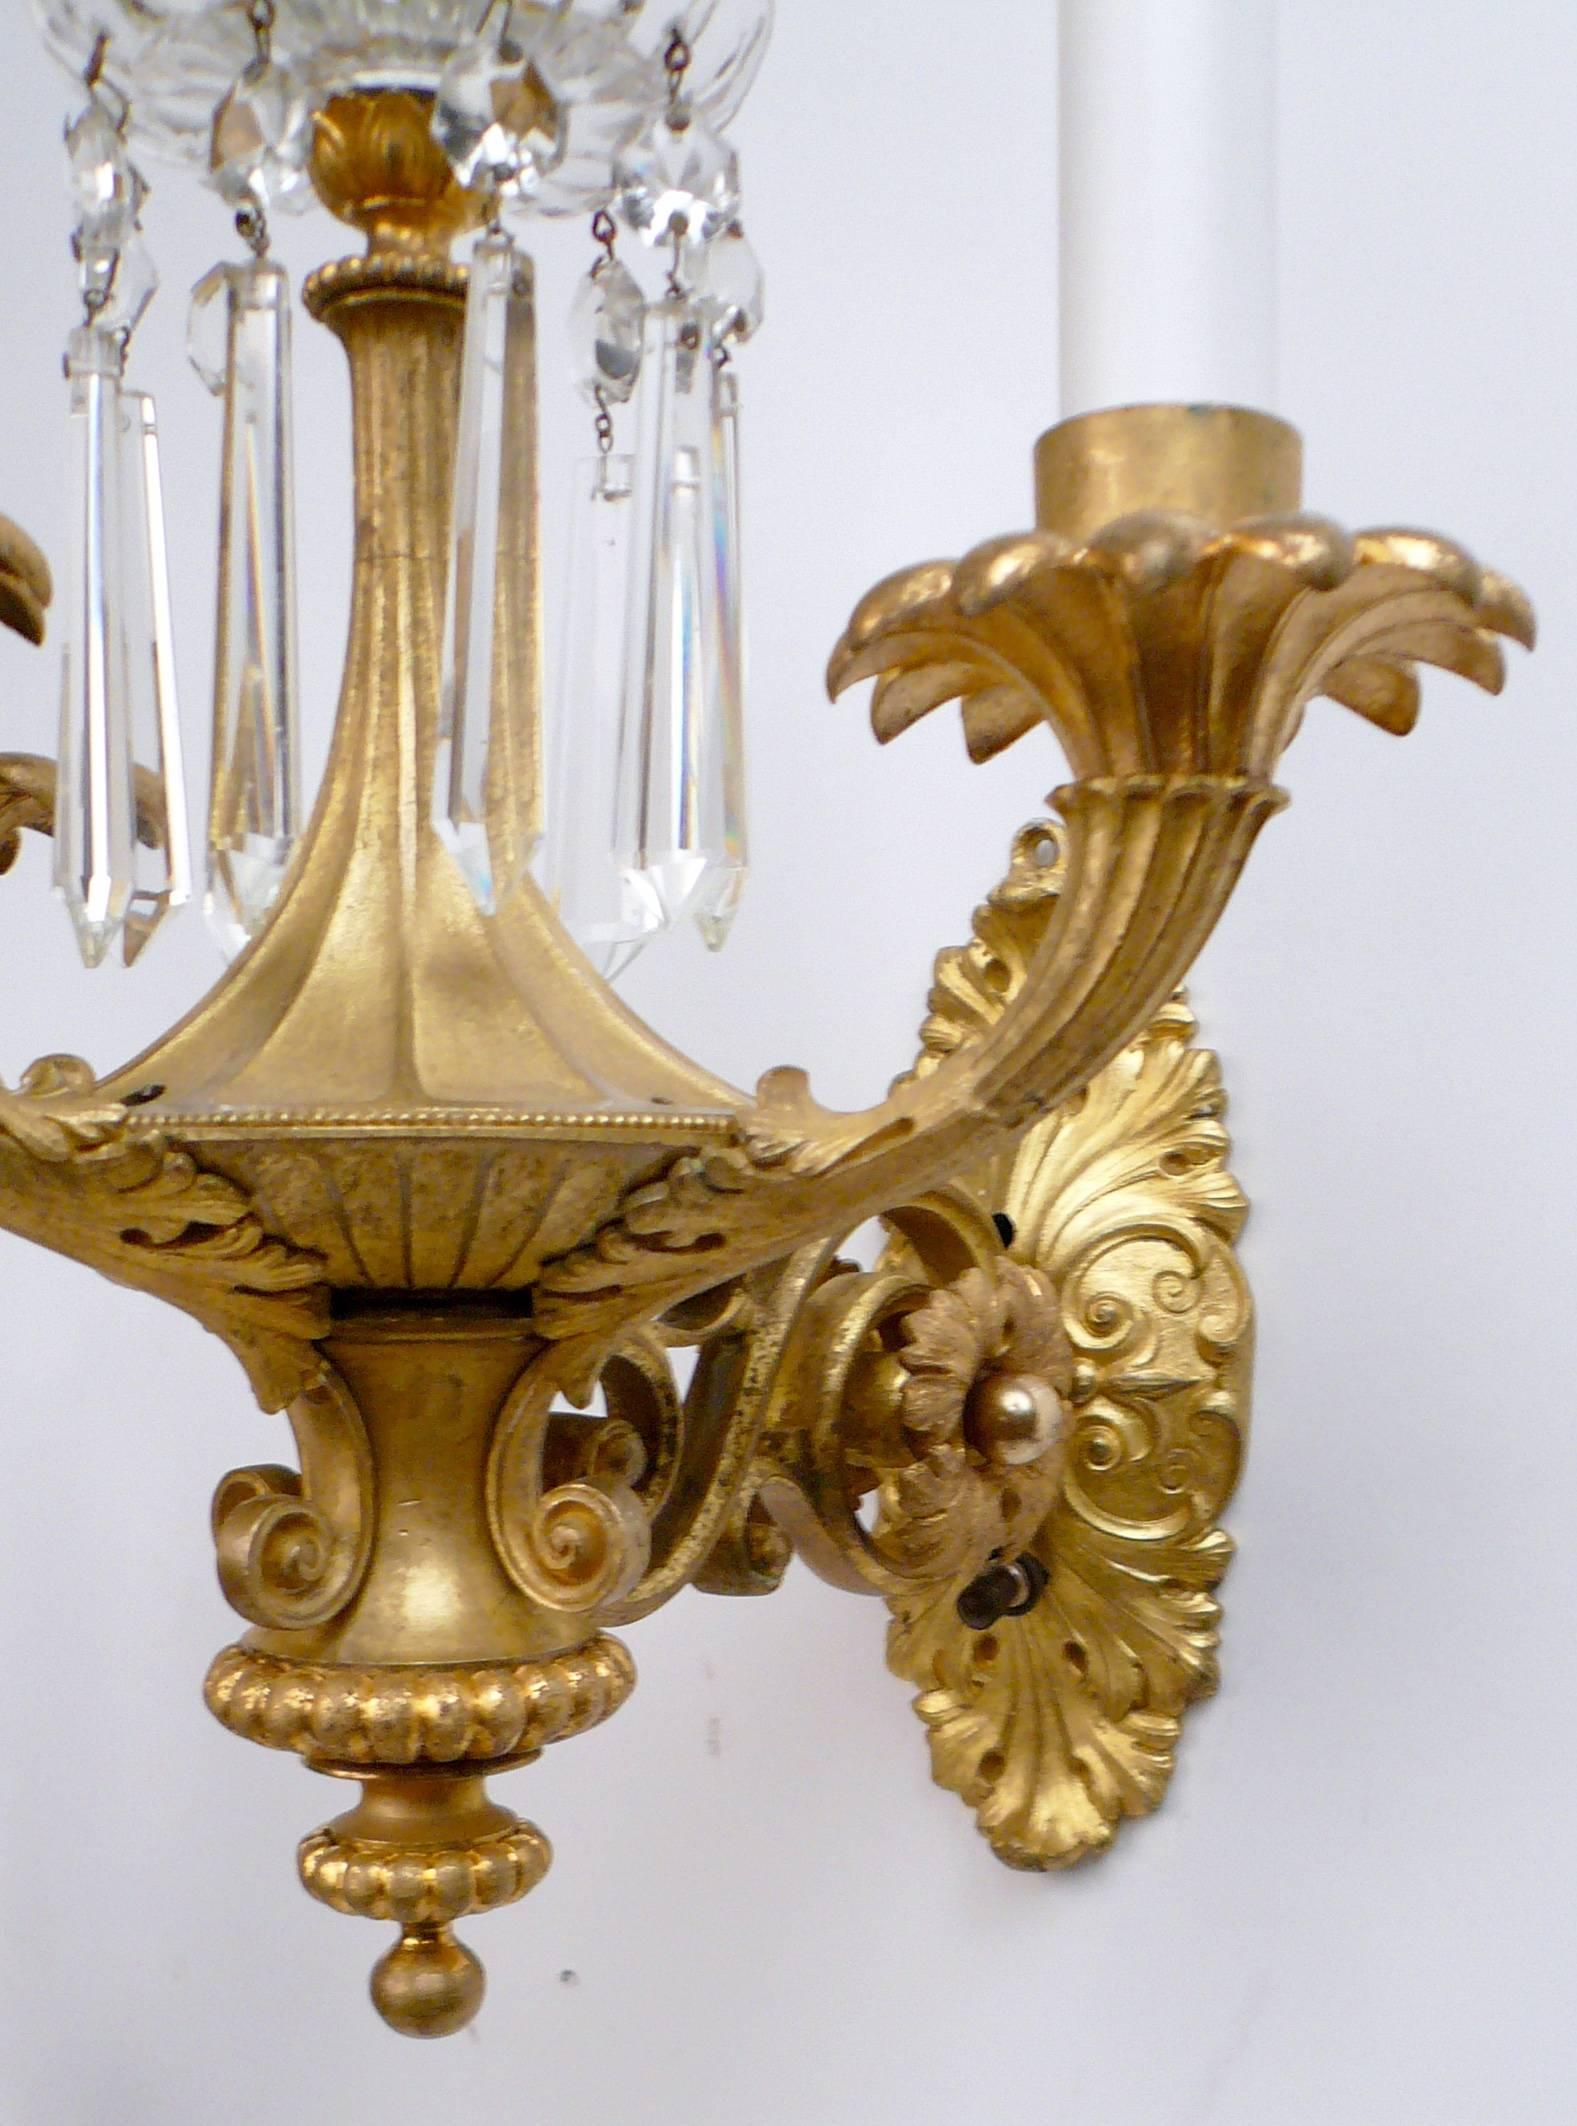 This handsome pair of William IV three light sconces feature classical motifs including urn and acanthus leaf designs, and cut crystal obelisks.